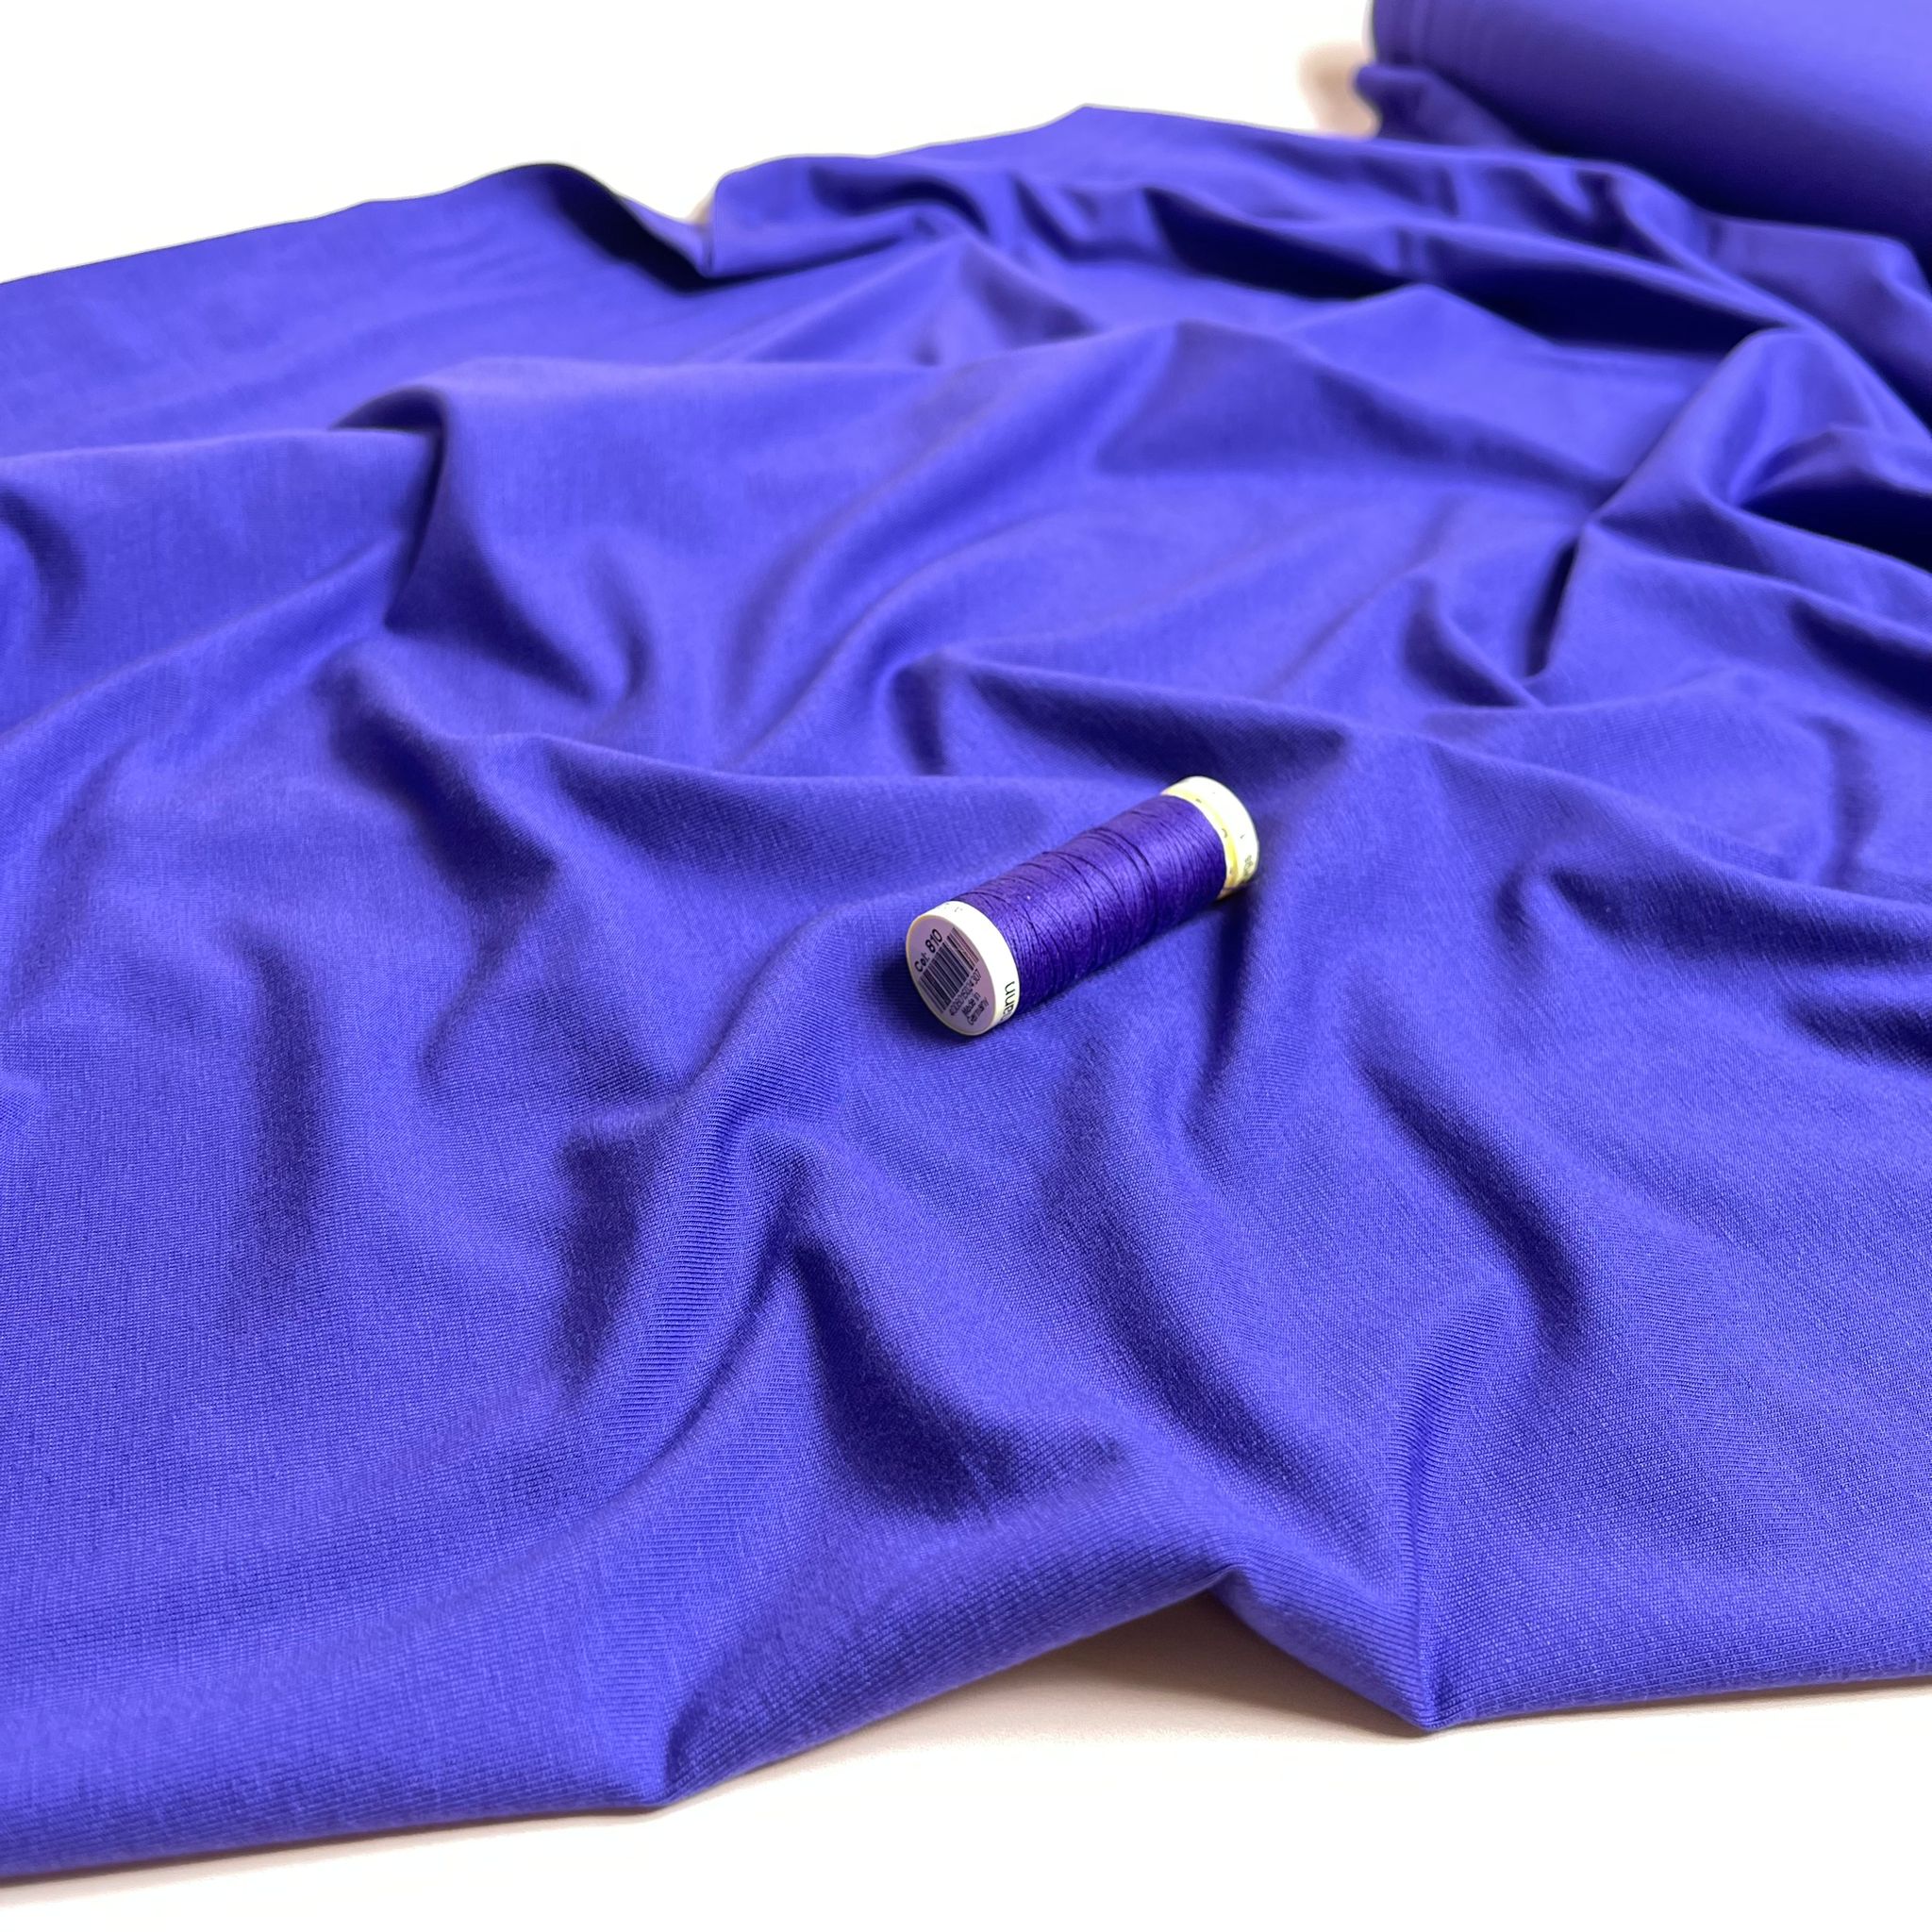 Lush in Purple Jersey Fabric with TENCEL™ Lyocell Fibres